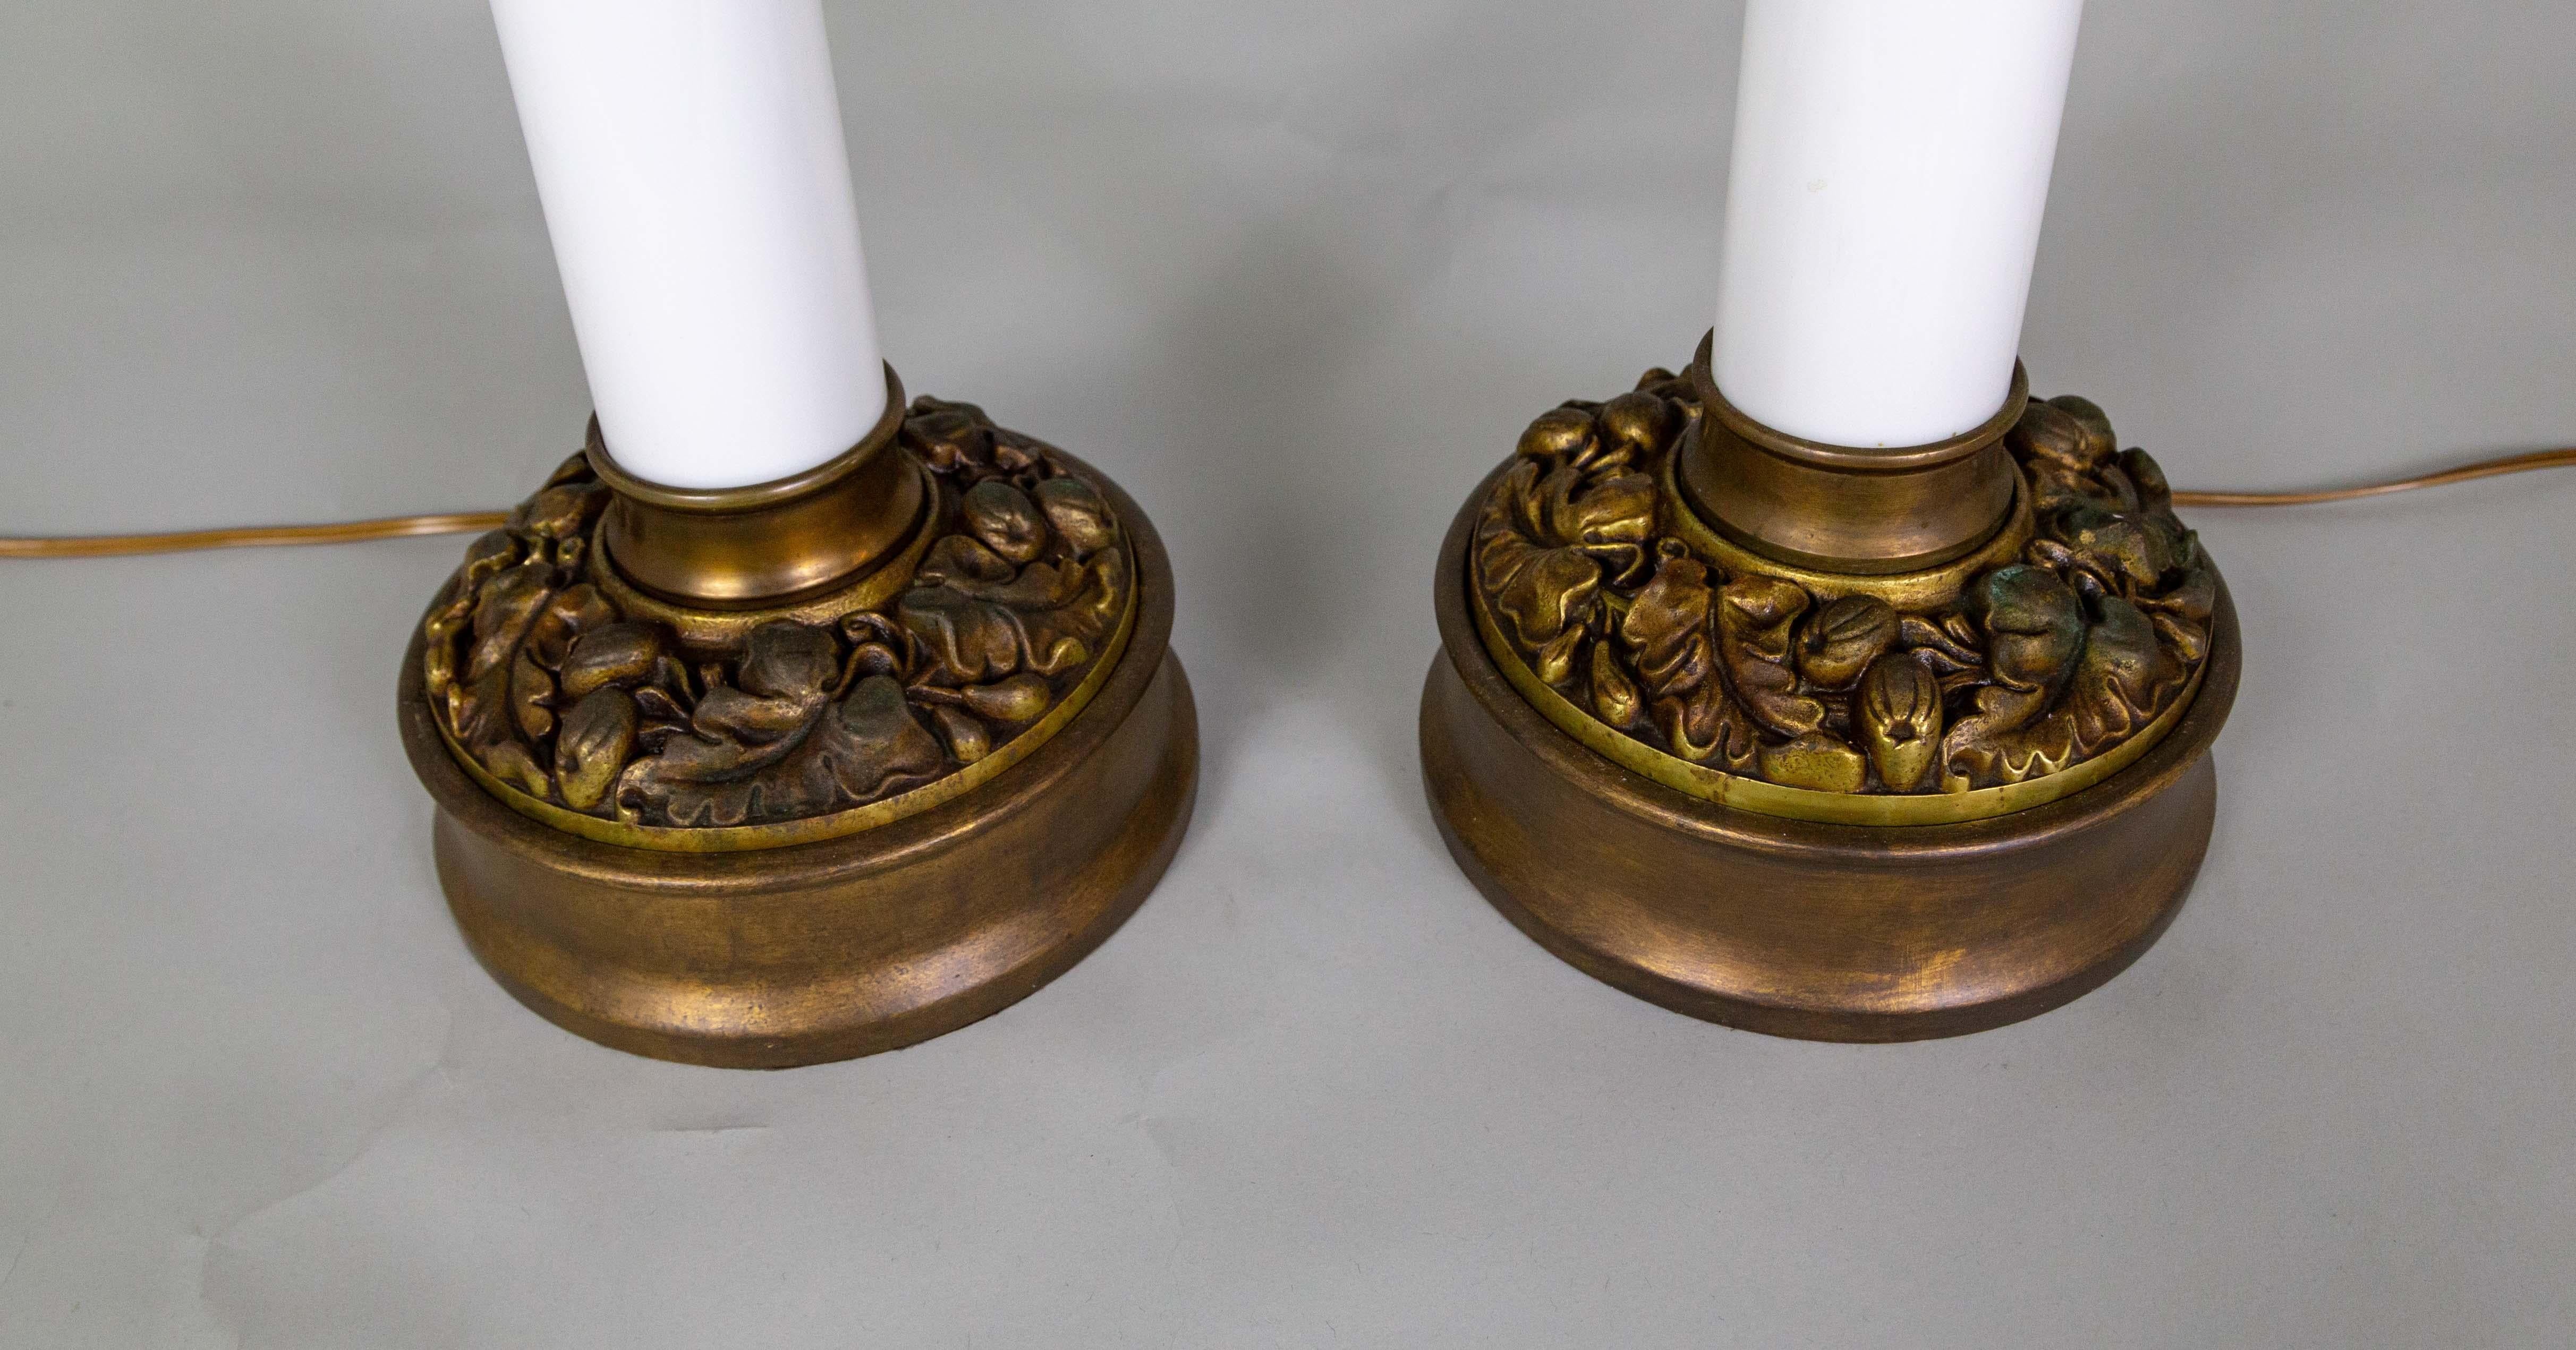 A striking pair of sizable table lamps with milk glass columns on bronze-tinted grape leaf bases. They are made by Paul Hanson Lighting Company, which operated in New York from the 1920s to the 1970s. Their high quality and design make them popular